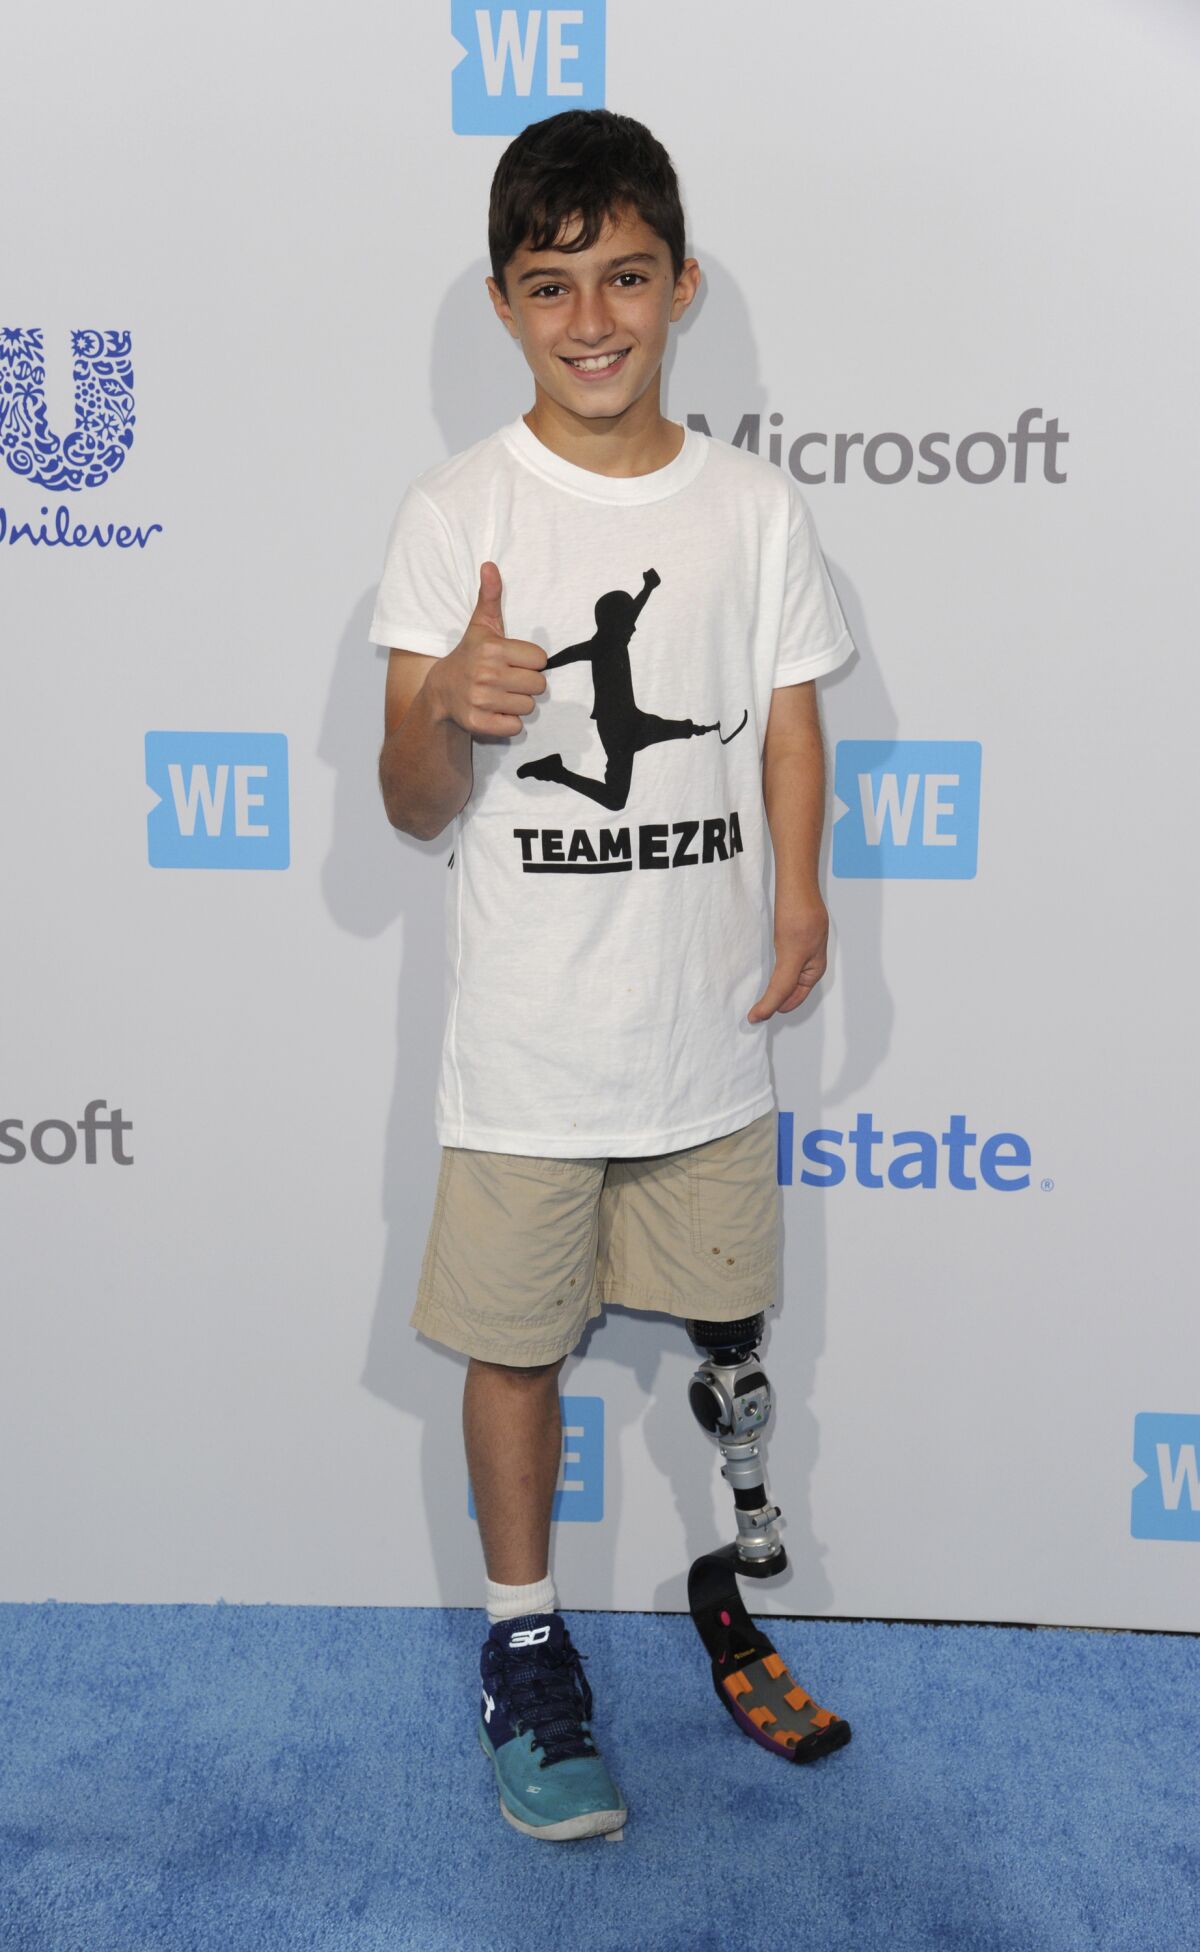 Ezra Frech arrives at WE Day California at the Forum.